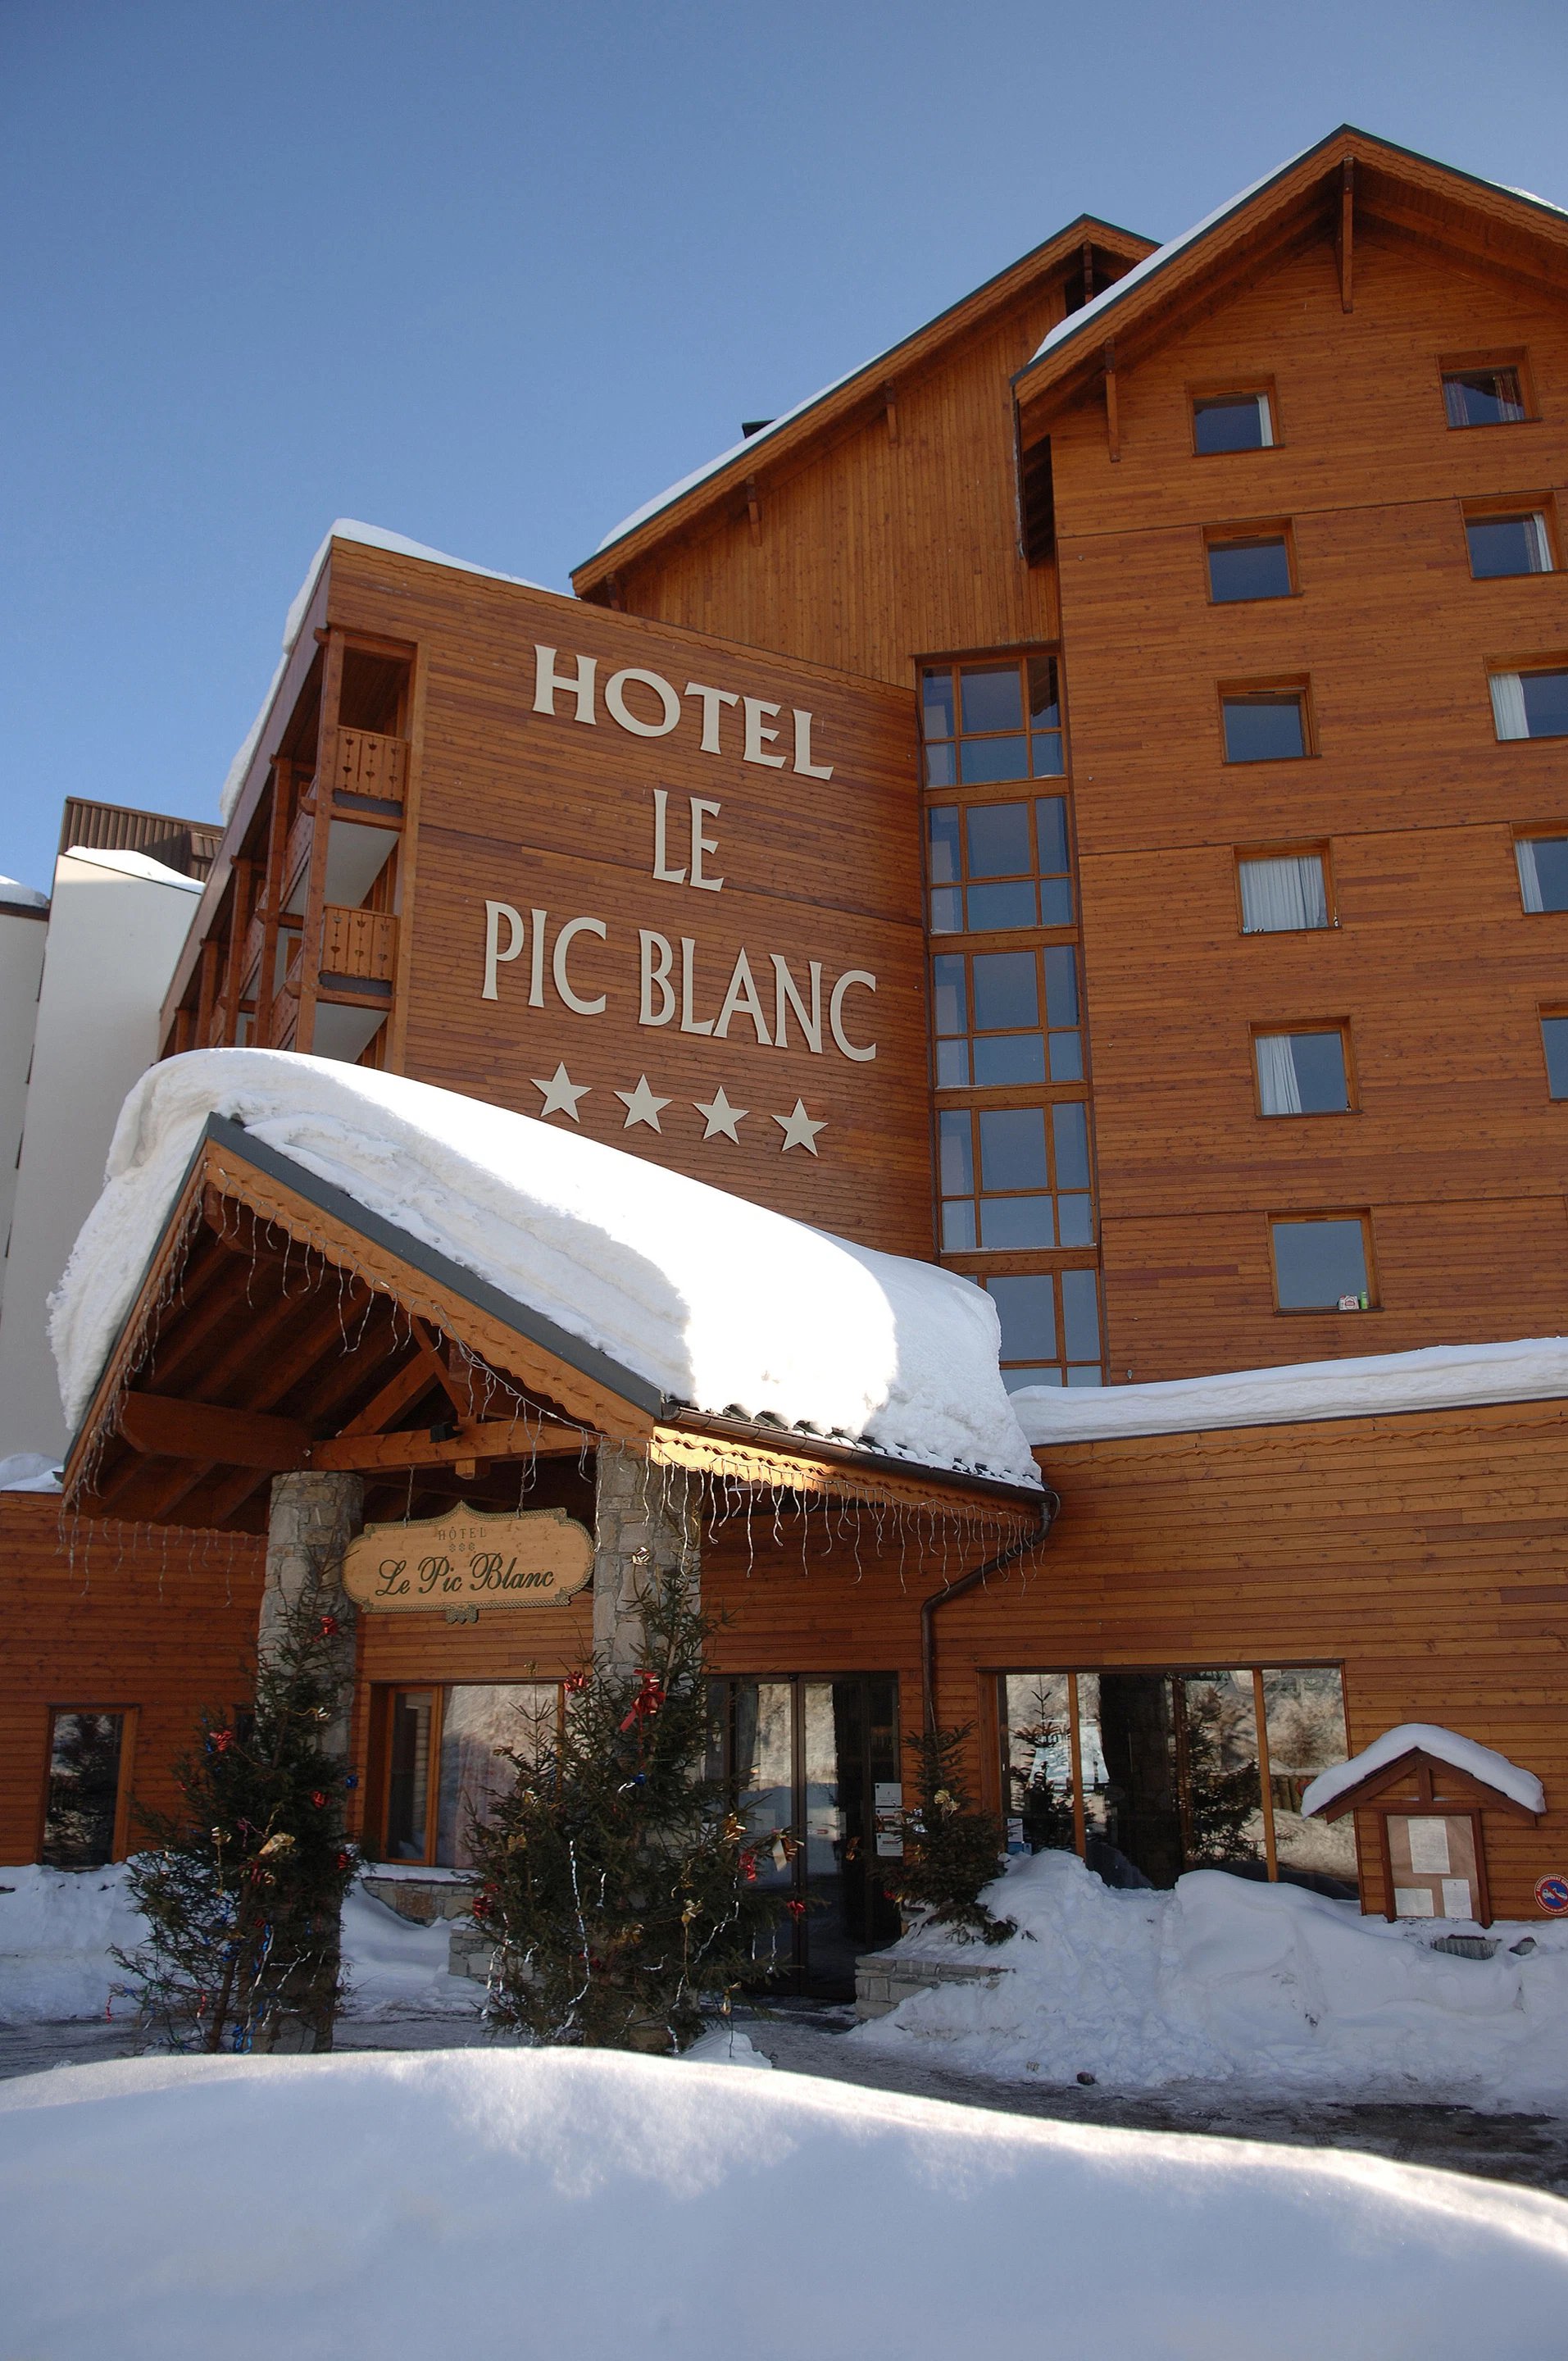 Facade of the Hotel Le Pic Blanc